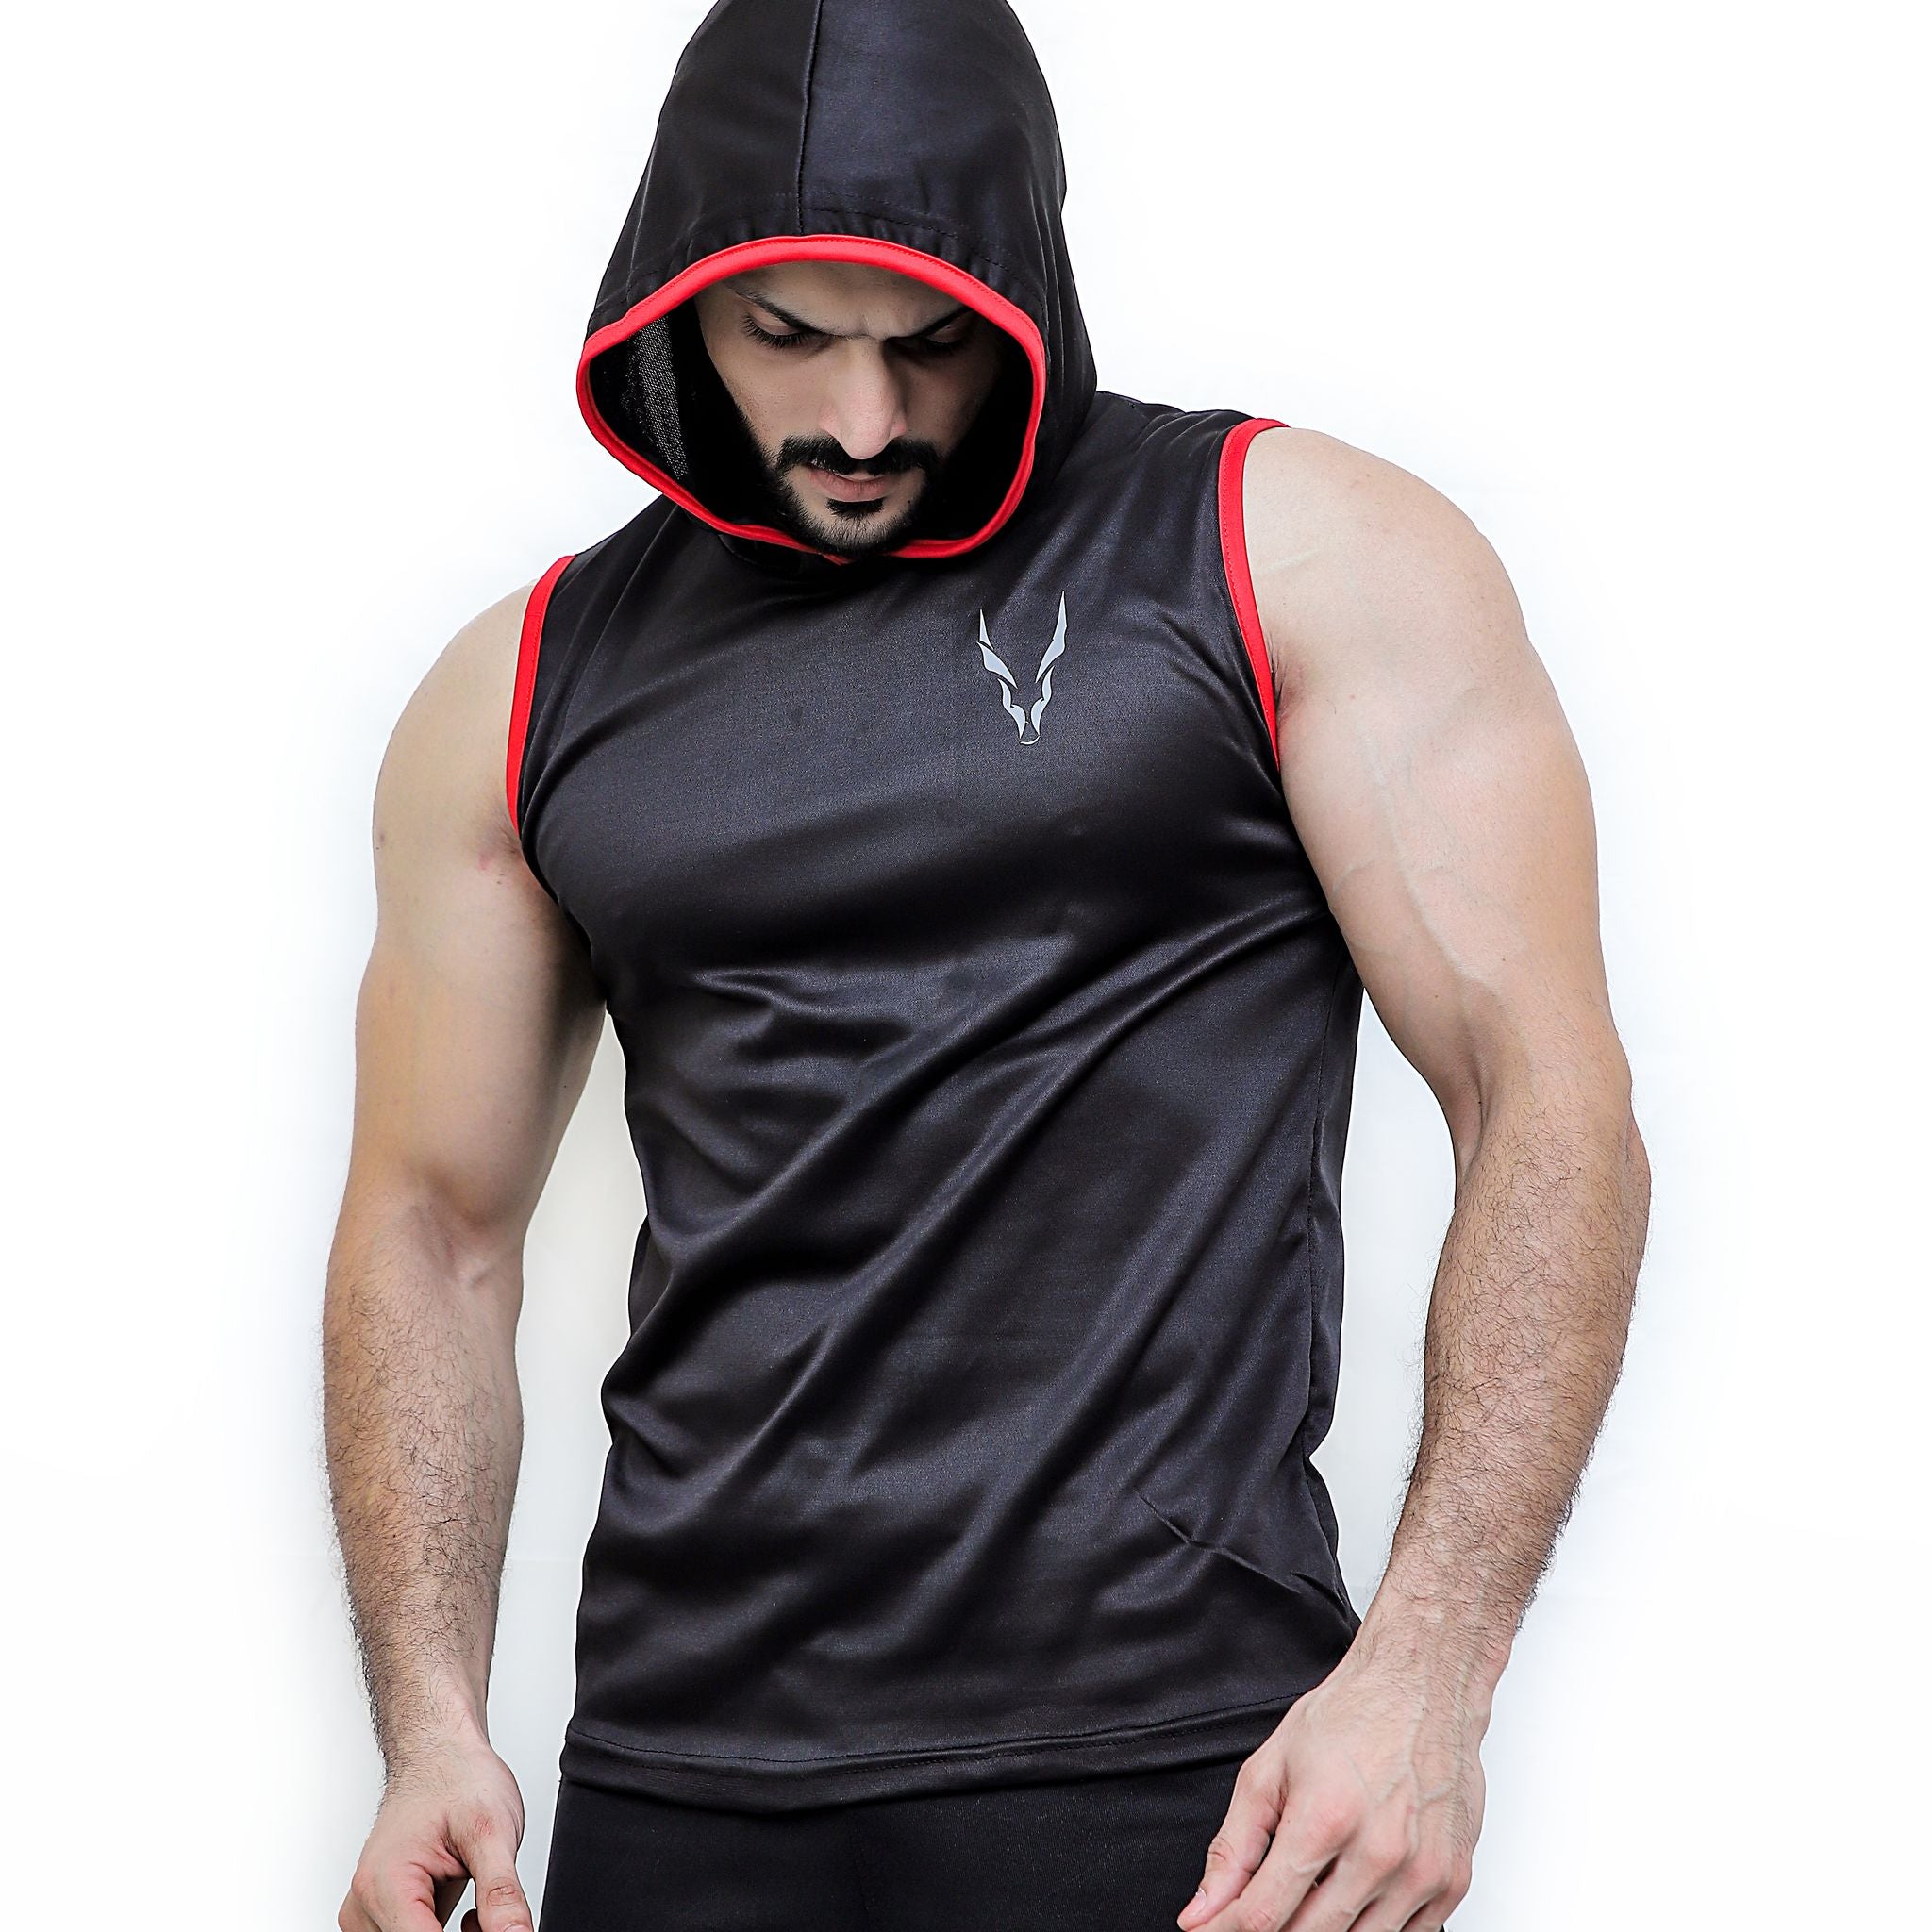 Black with red striped Hooded Tank